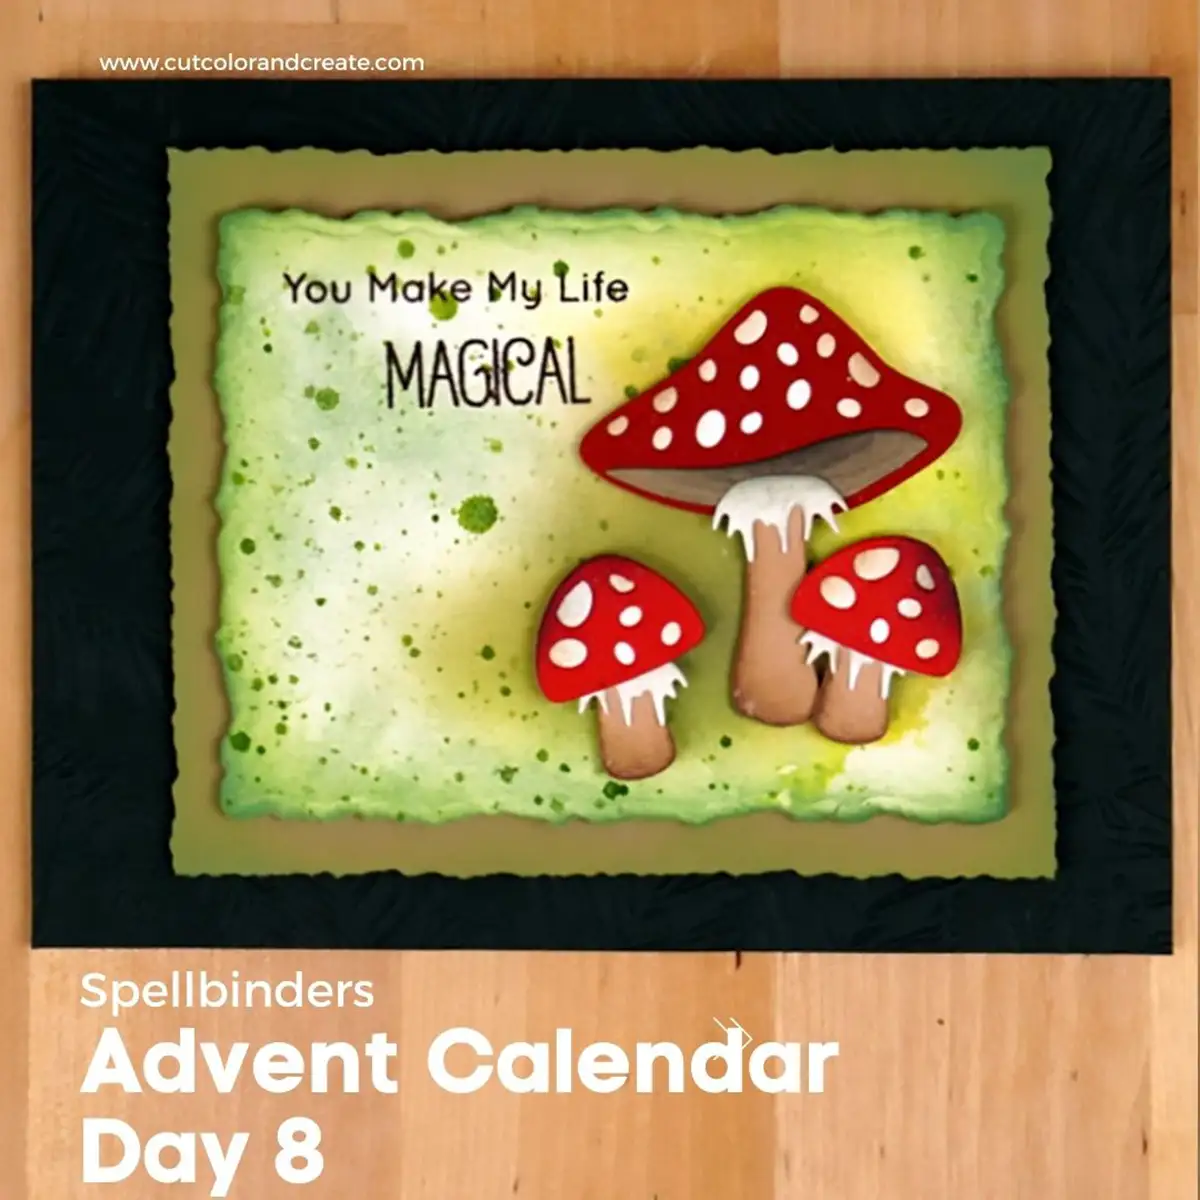         You make my life magical with advent calendar day 8 featuring magical mushrooms.